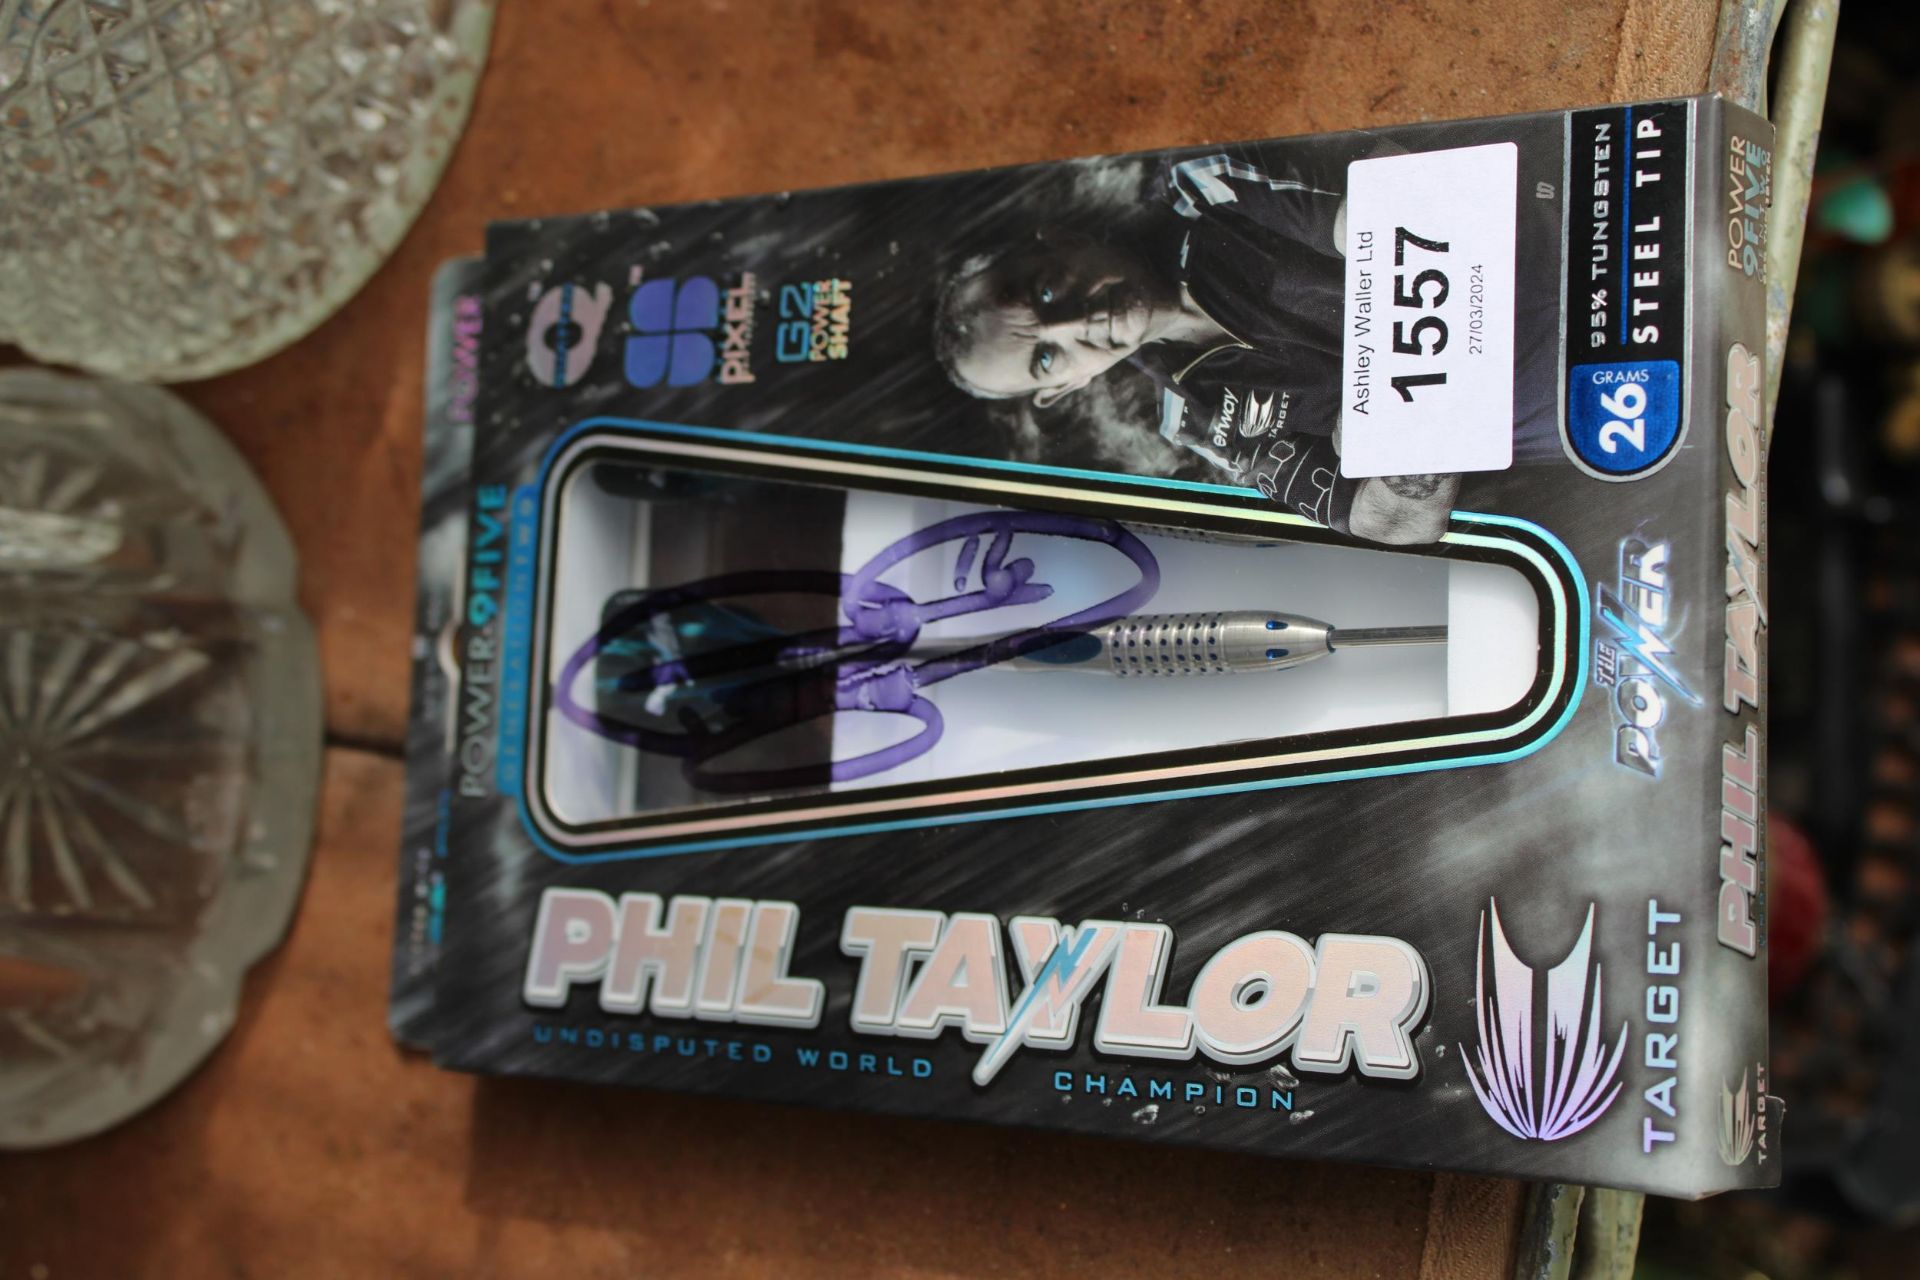 A SET OF BRAND NEW AND BOXED PHIL TAYLOR POWER-9FIVE GENERATION TWO POWER SHAFT 26G 95% TUNGSTEN